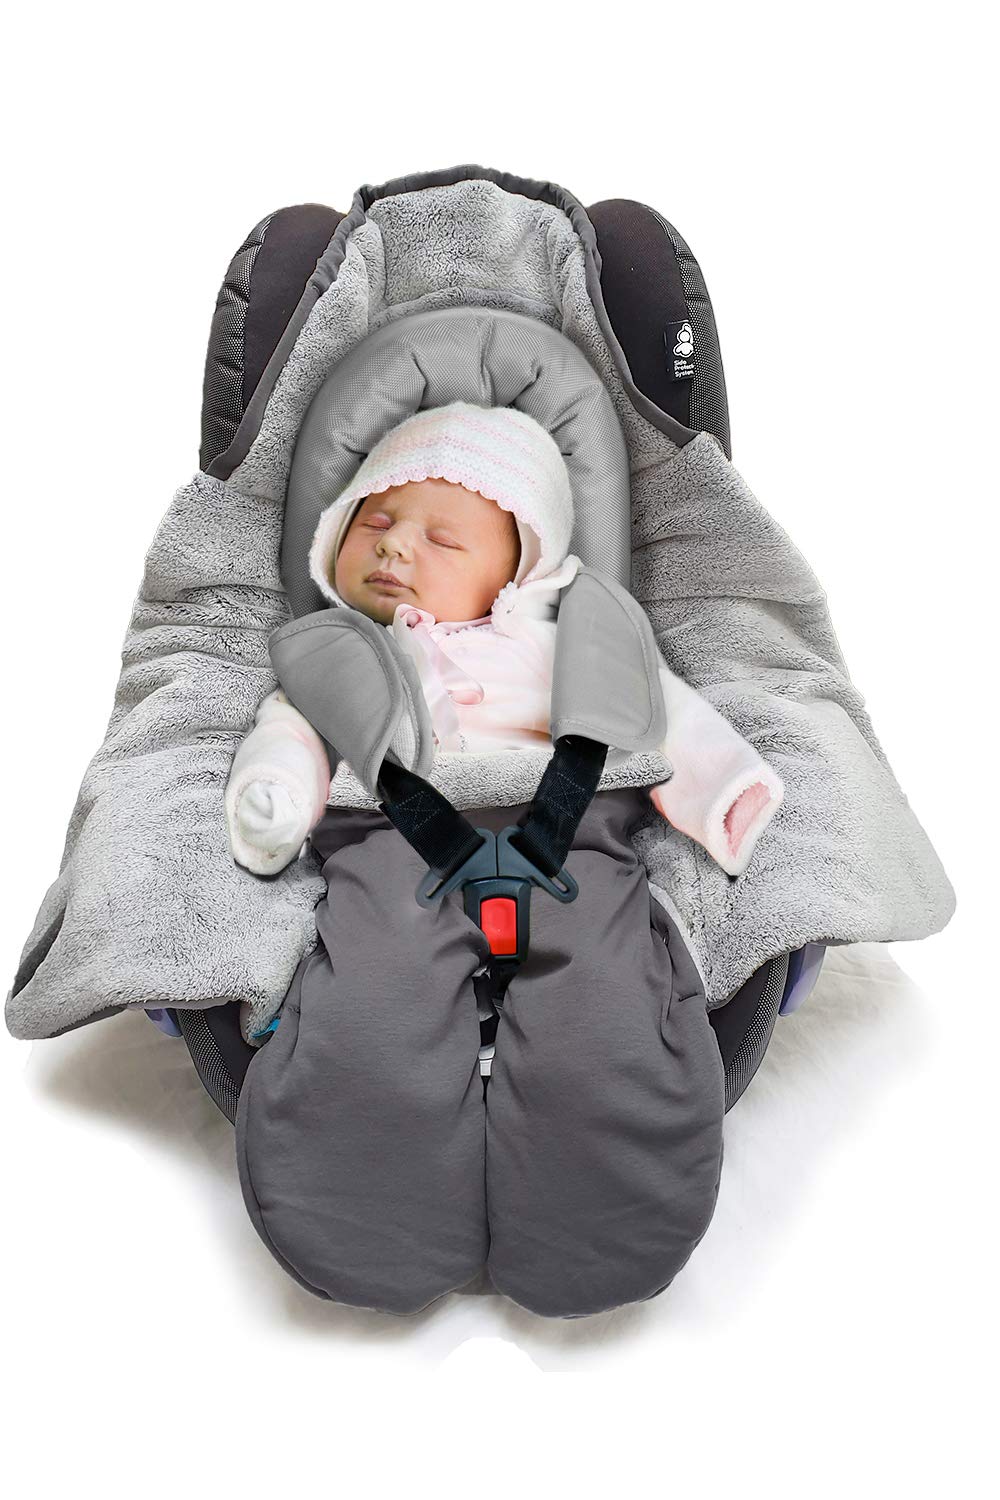 Wallaboo Universal Swaddling Blanket for Baby Seat, Car Seat, e.g. for Maxi-Cosi,Römer, for Pushchairs, Buggies or Cots, Faux Fur and Cotton, 96 x 90 cm, 0-12 Months, Colour: Grey / Grey